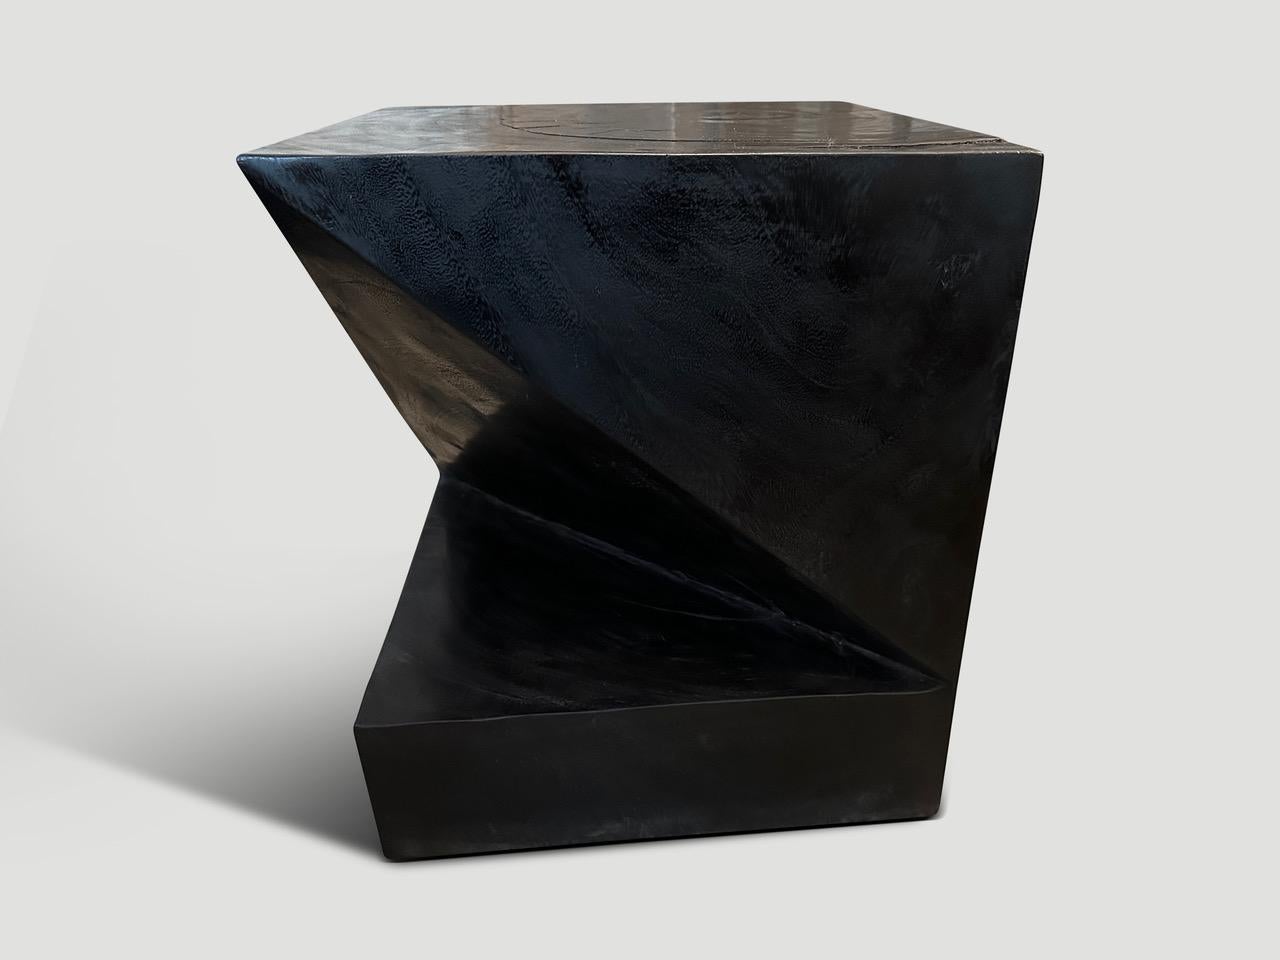 Solid reclaimed suar wood side table. Inspired by the art of paper folding which is often associated with Japanese culture. Pair available. The price reflects the one shown.

The Triple Burnt Collection represents a unique line of modern furniture